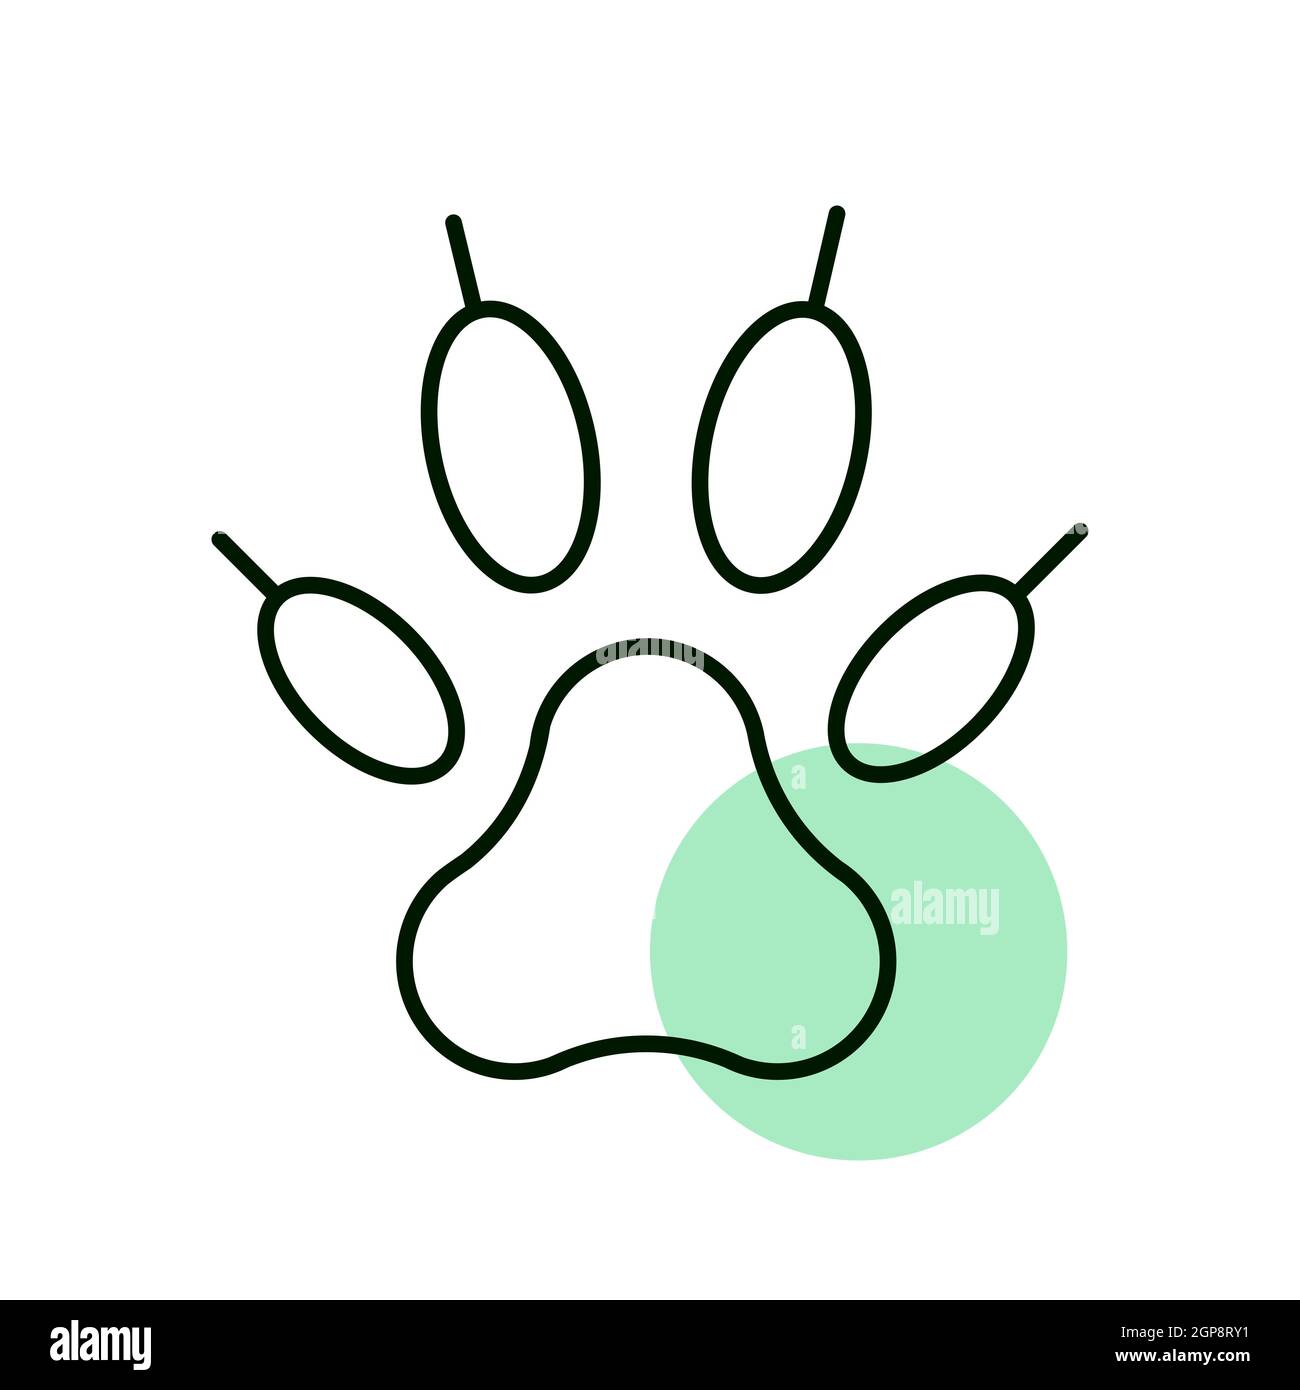 Predatory paw vector icon. Pet animal sign. Graph symbol for pet and veterinary web site and apps design, logo, app, UI Stock Photo